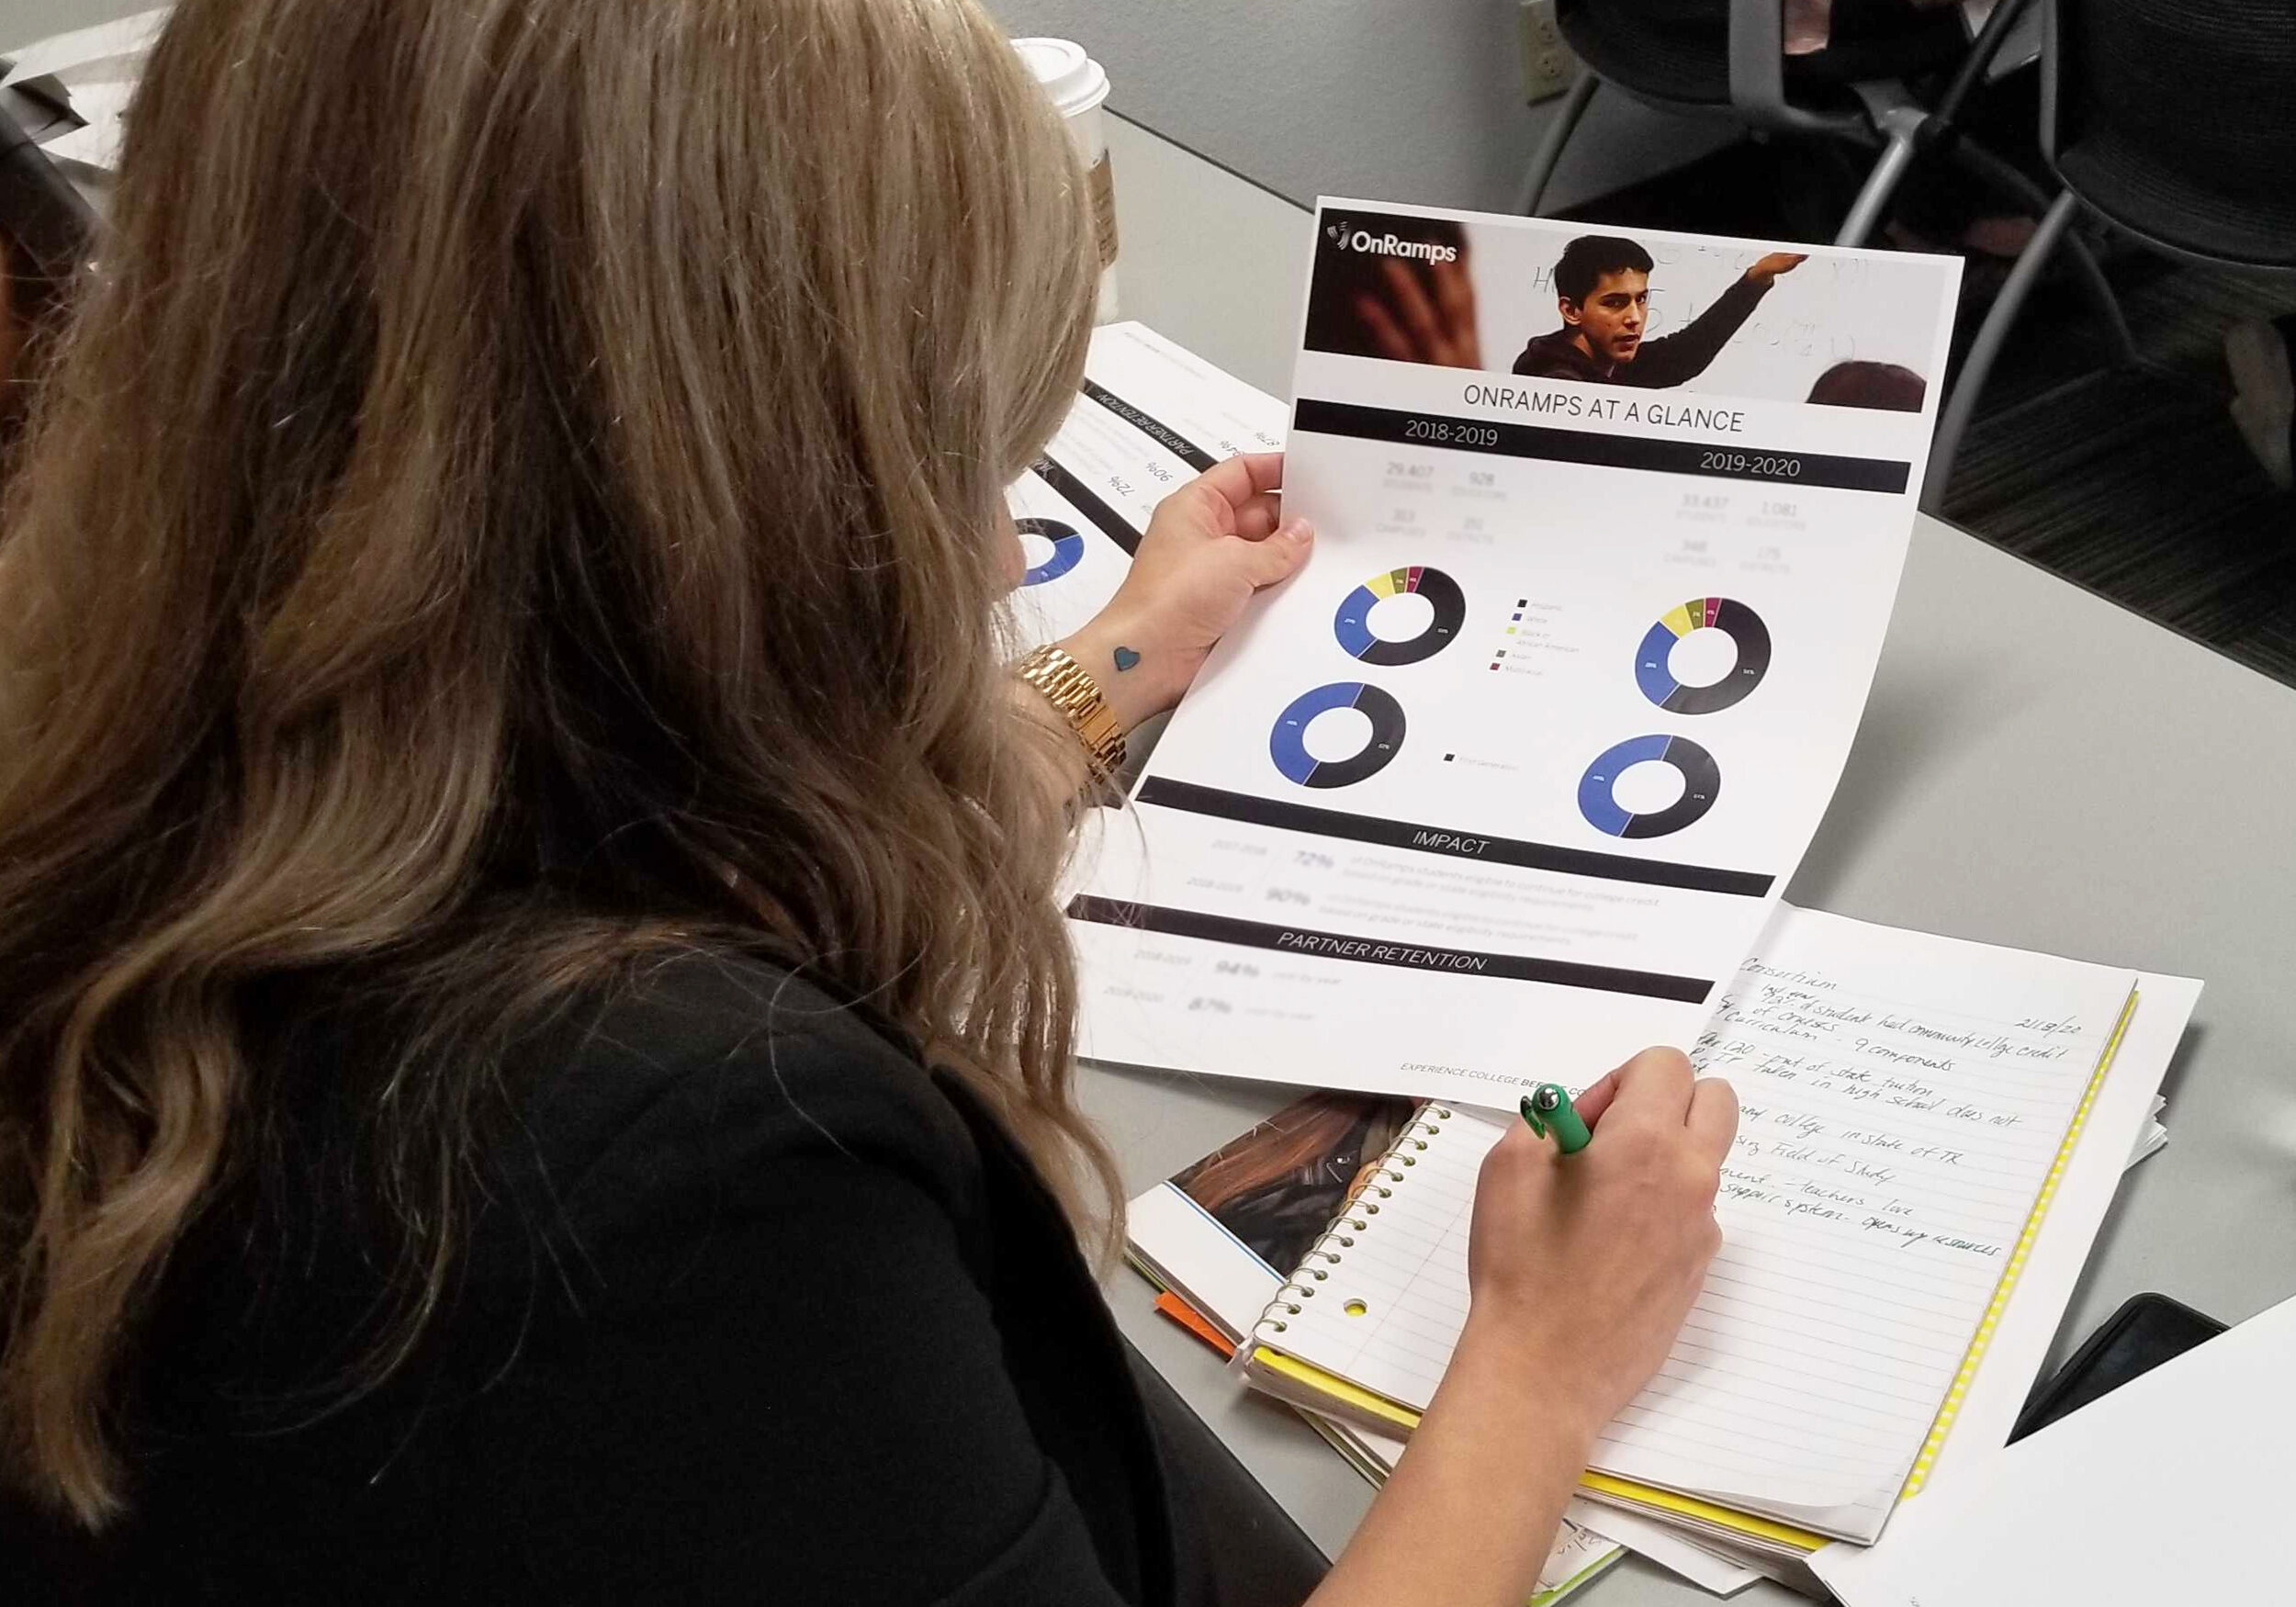 woman looking at a OnRamps pie chart and writing in a notebook.